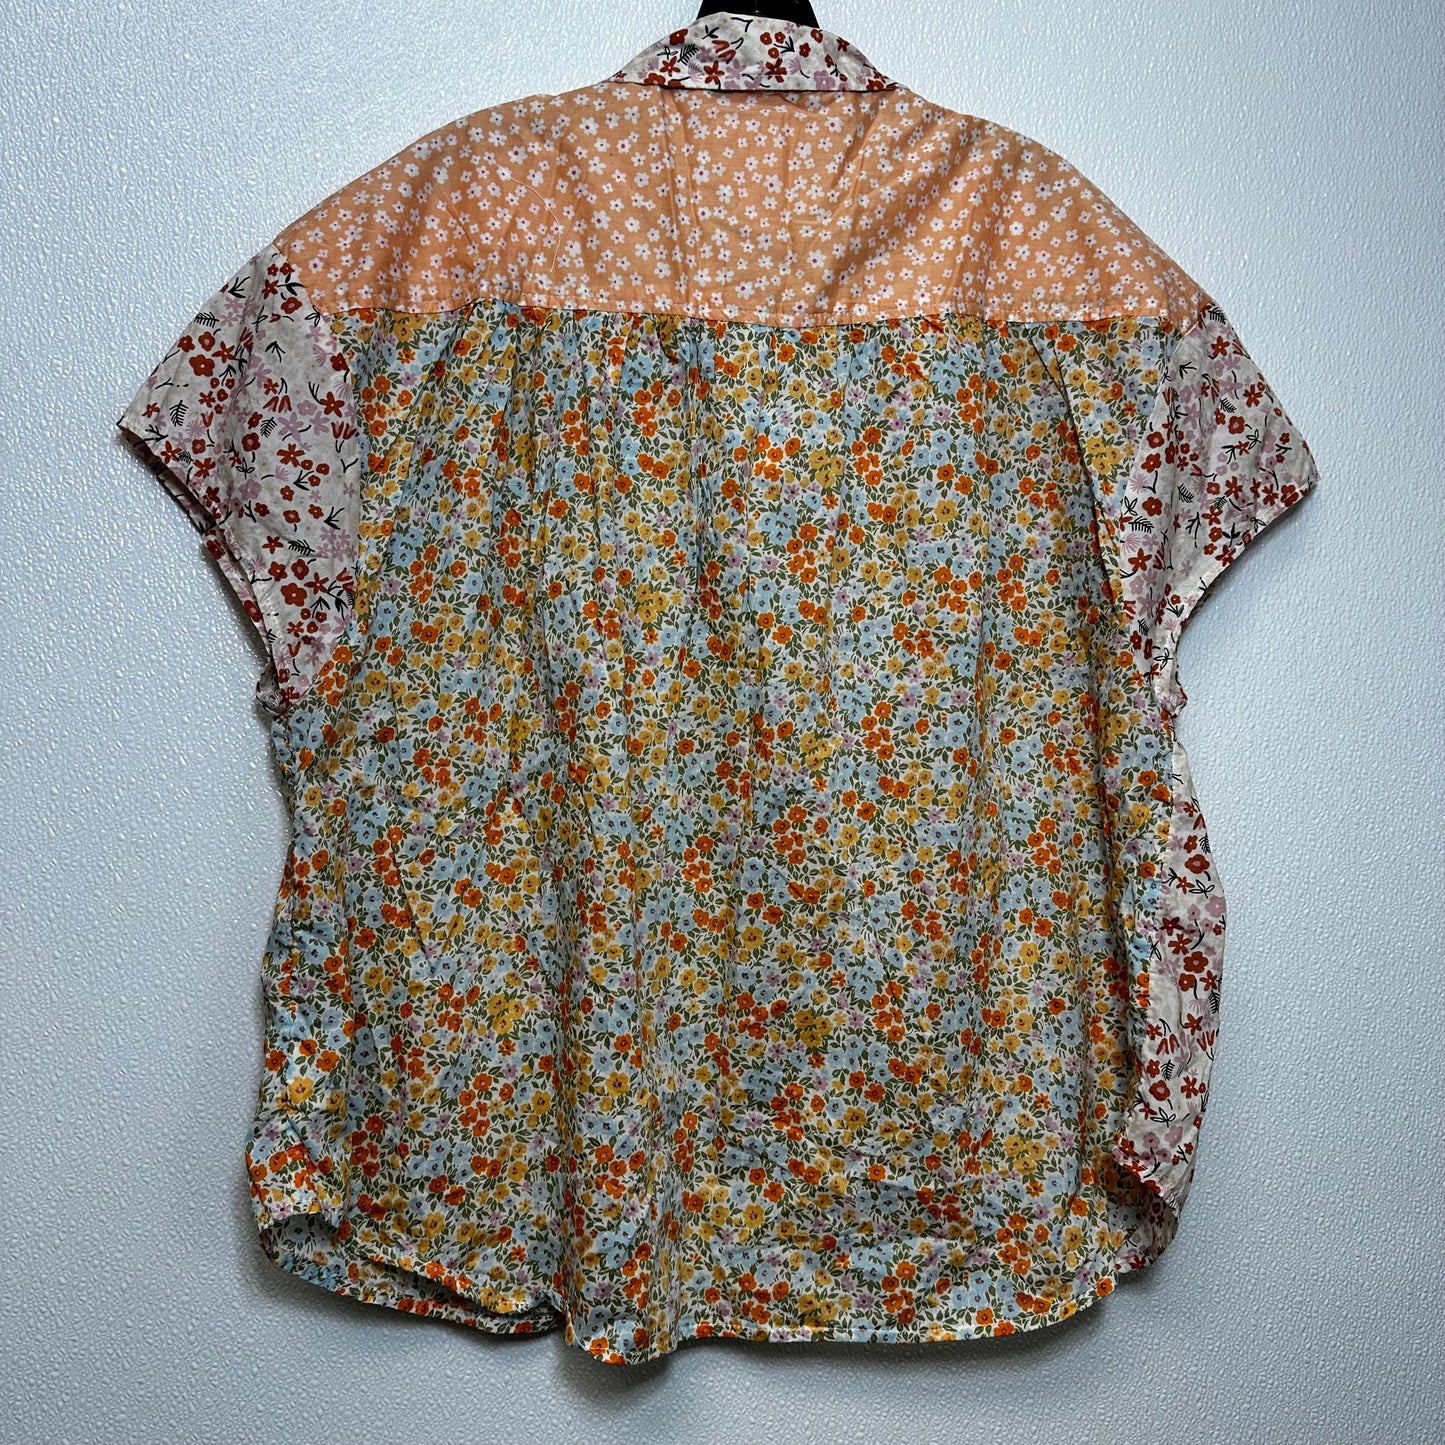 Floral Top Short Sleeve American Eagle, Size M